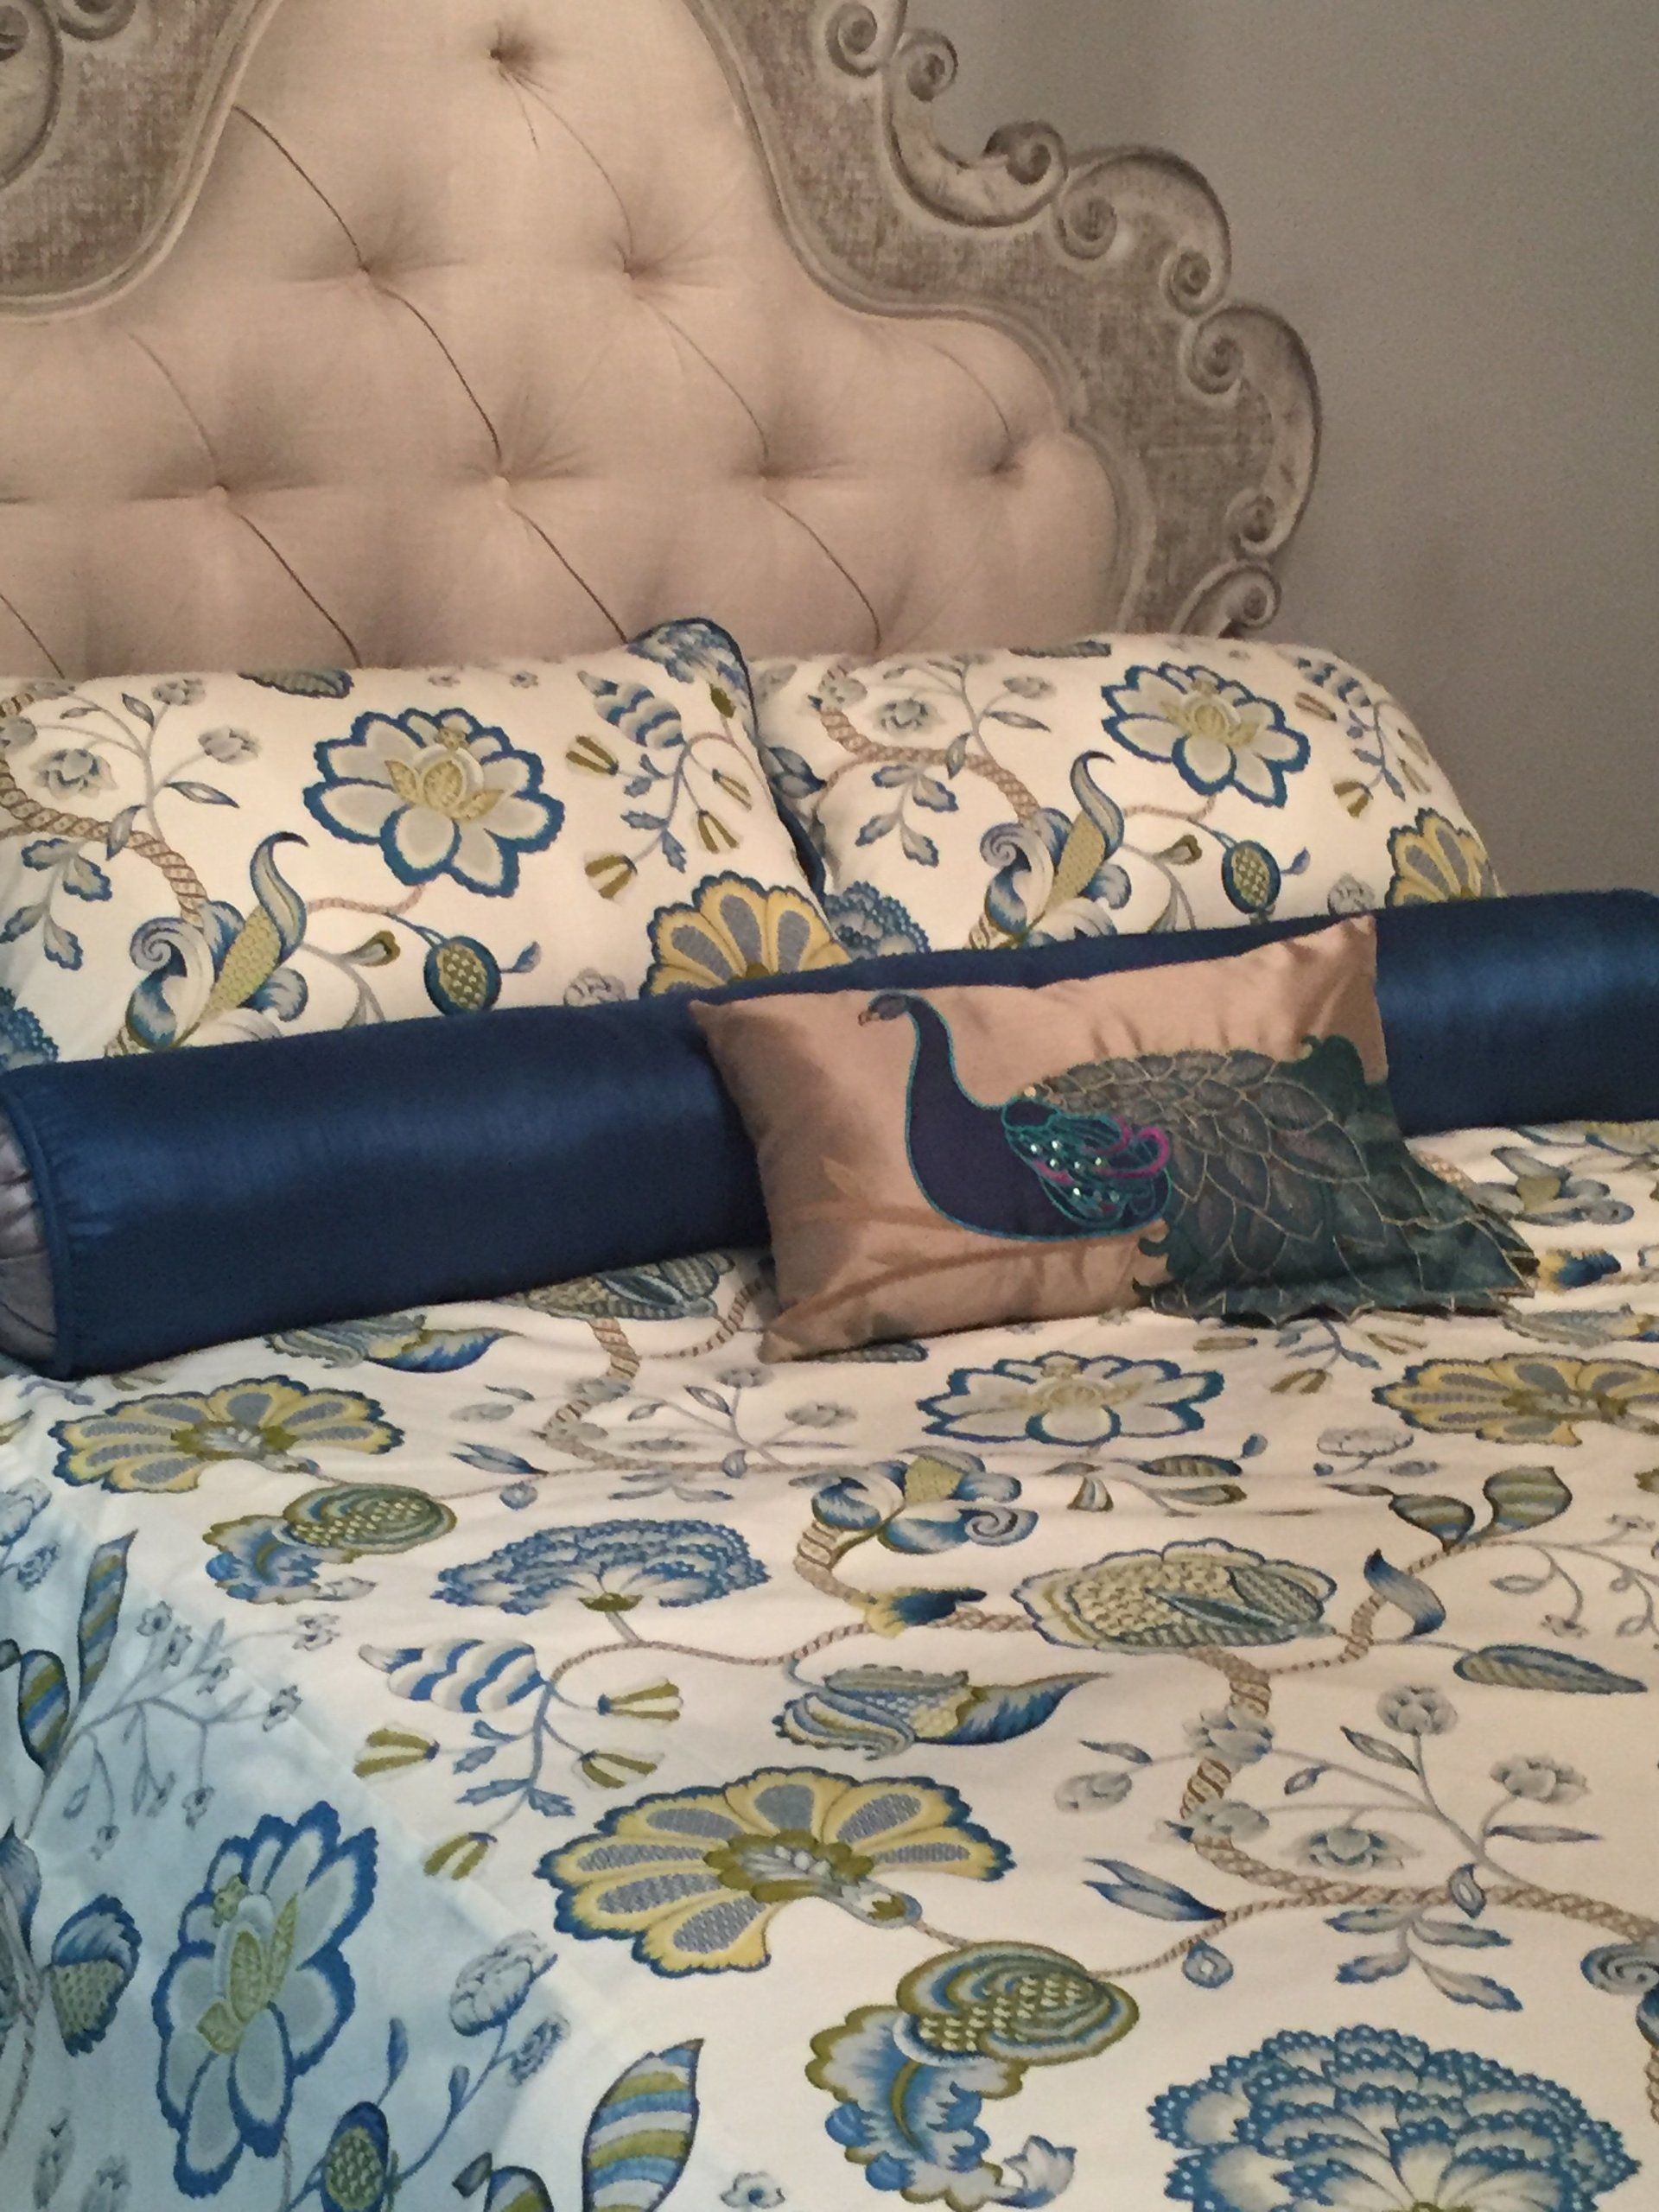 Example of duvet cover in gold, teal and green with large round teal pillow and matching pillow with peacock embroidery.